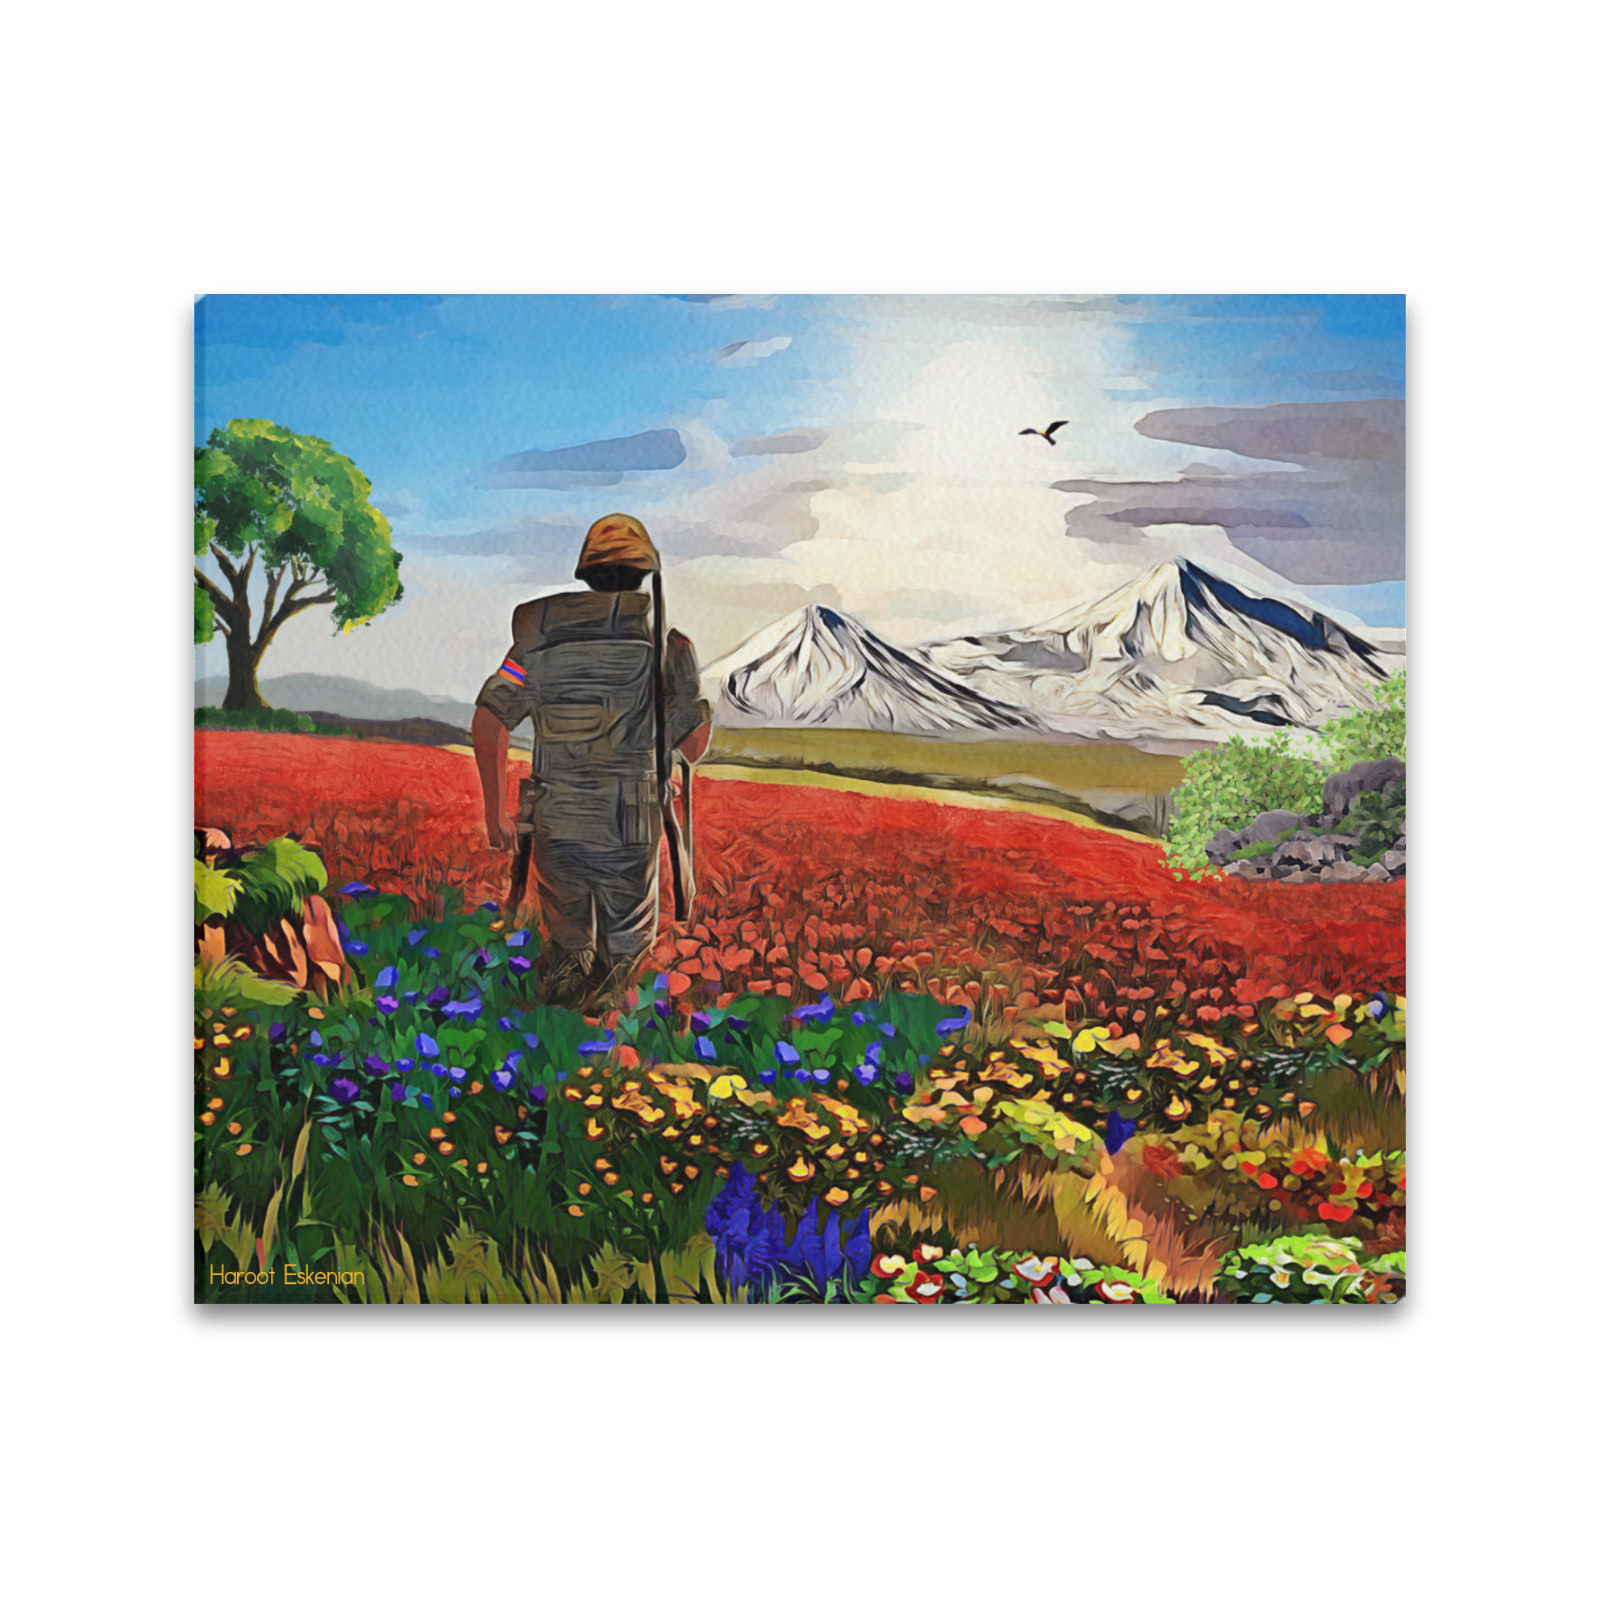 The Soldier Frame Canvas Print 24"x20"